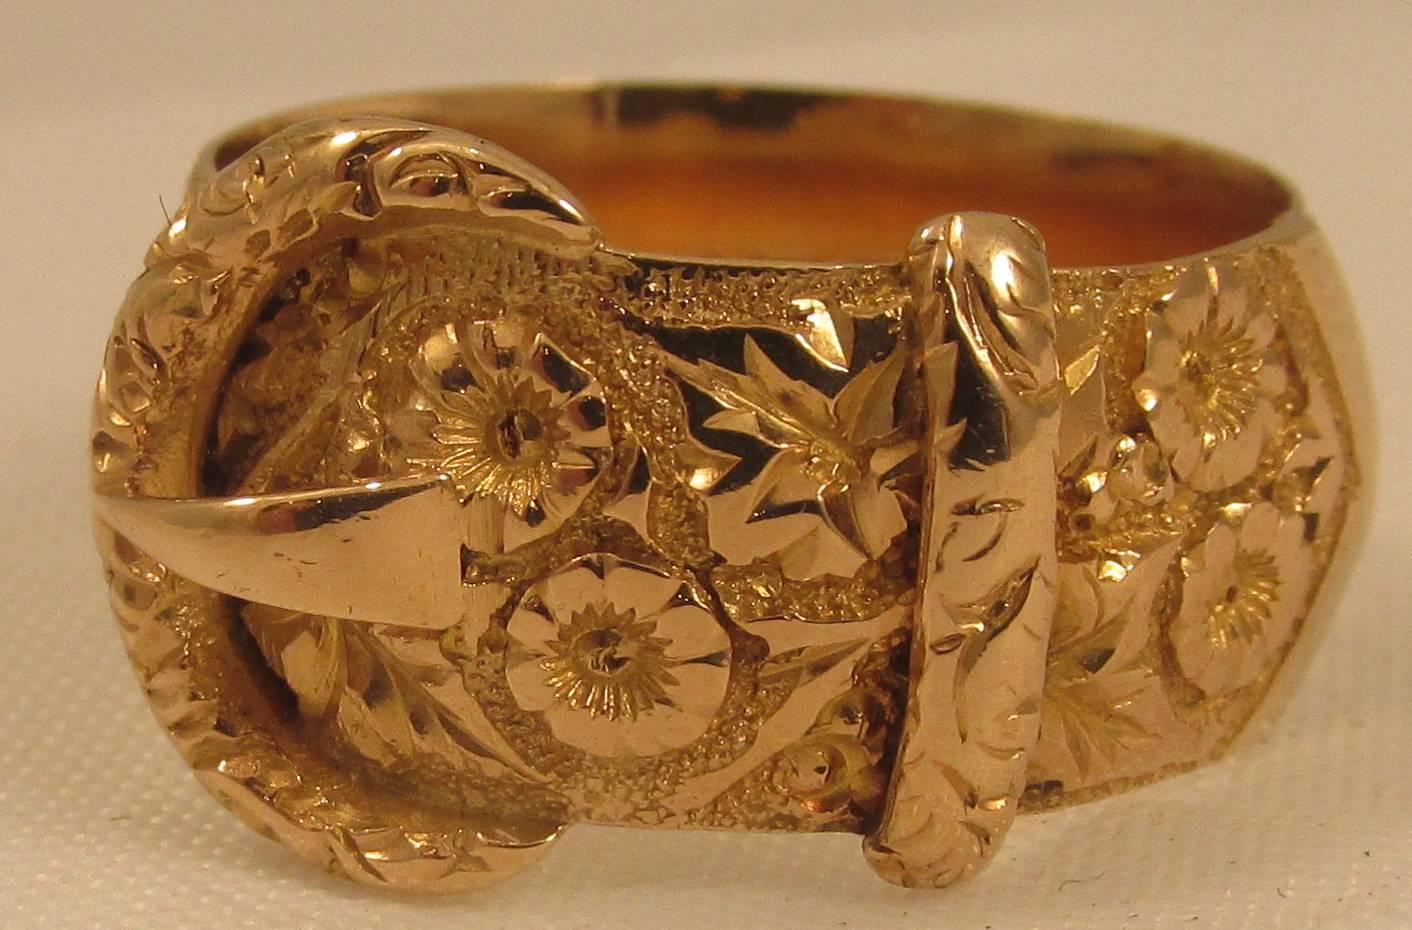 Wonderful Edwardian 18K gold buckle ring with an elaborate floral repousse design. Buckle rings and motifs were popular throughout Queen Victoria's reign.The one shown here is a beautiful example. The ring is a size 8 and has hallmarks for